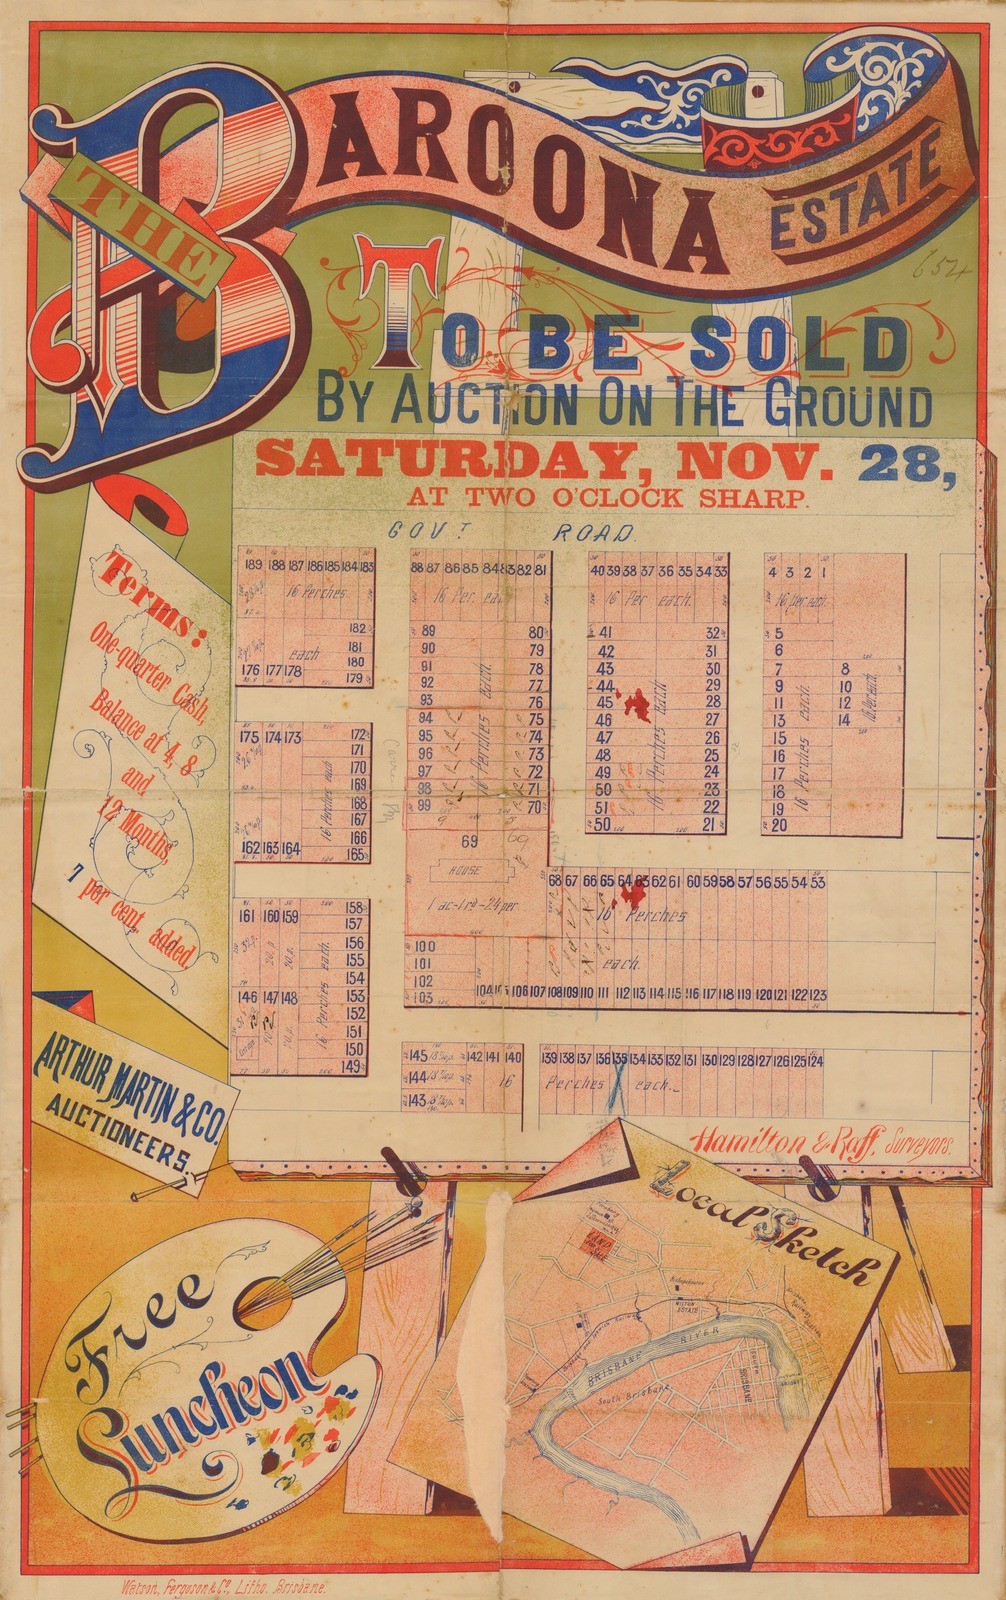 The Baroona Estate to be sold by auction on the ground Saturday, Nov. 28, at two o'clock sharp,1885.